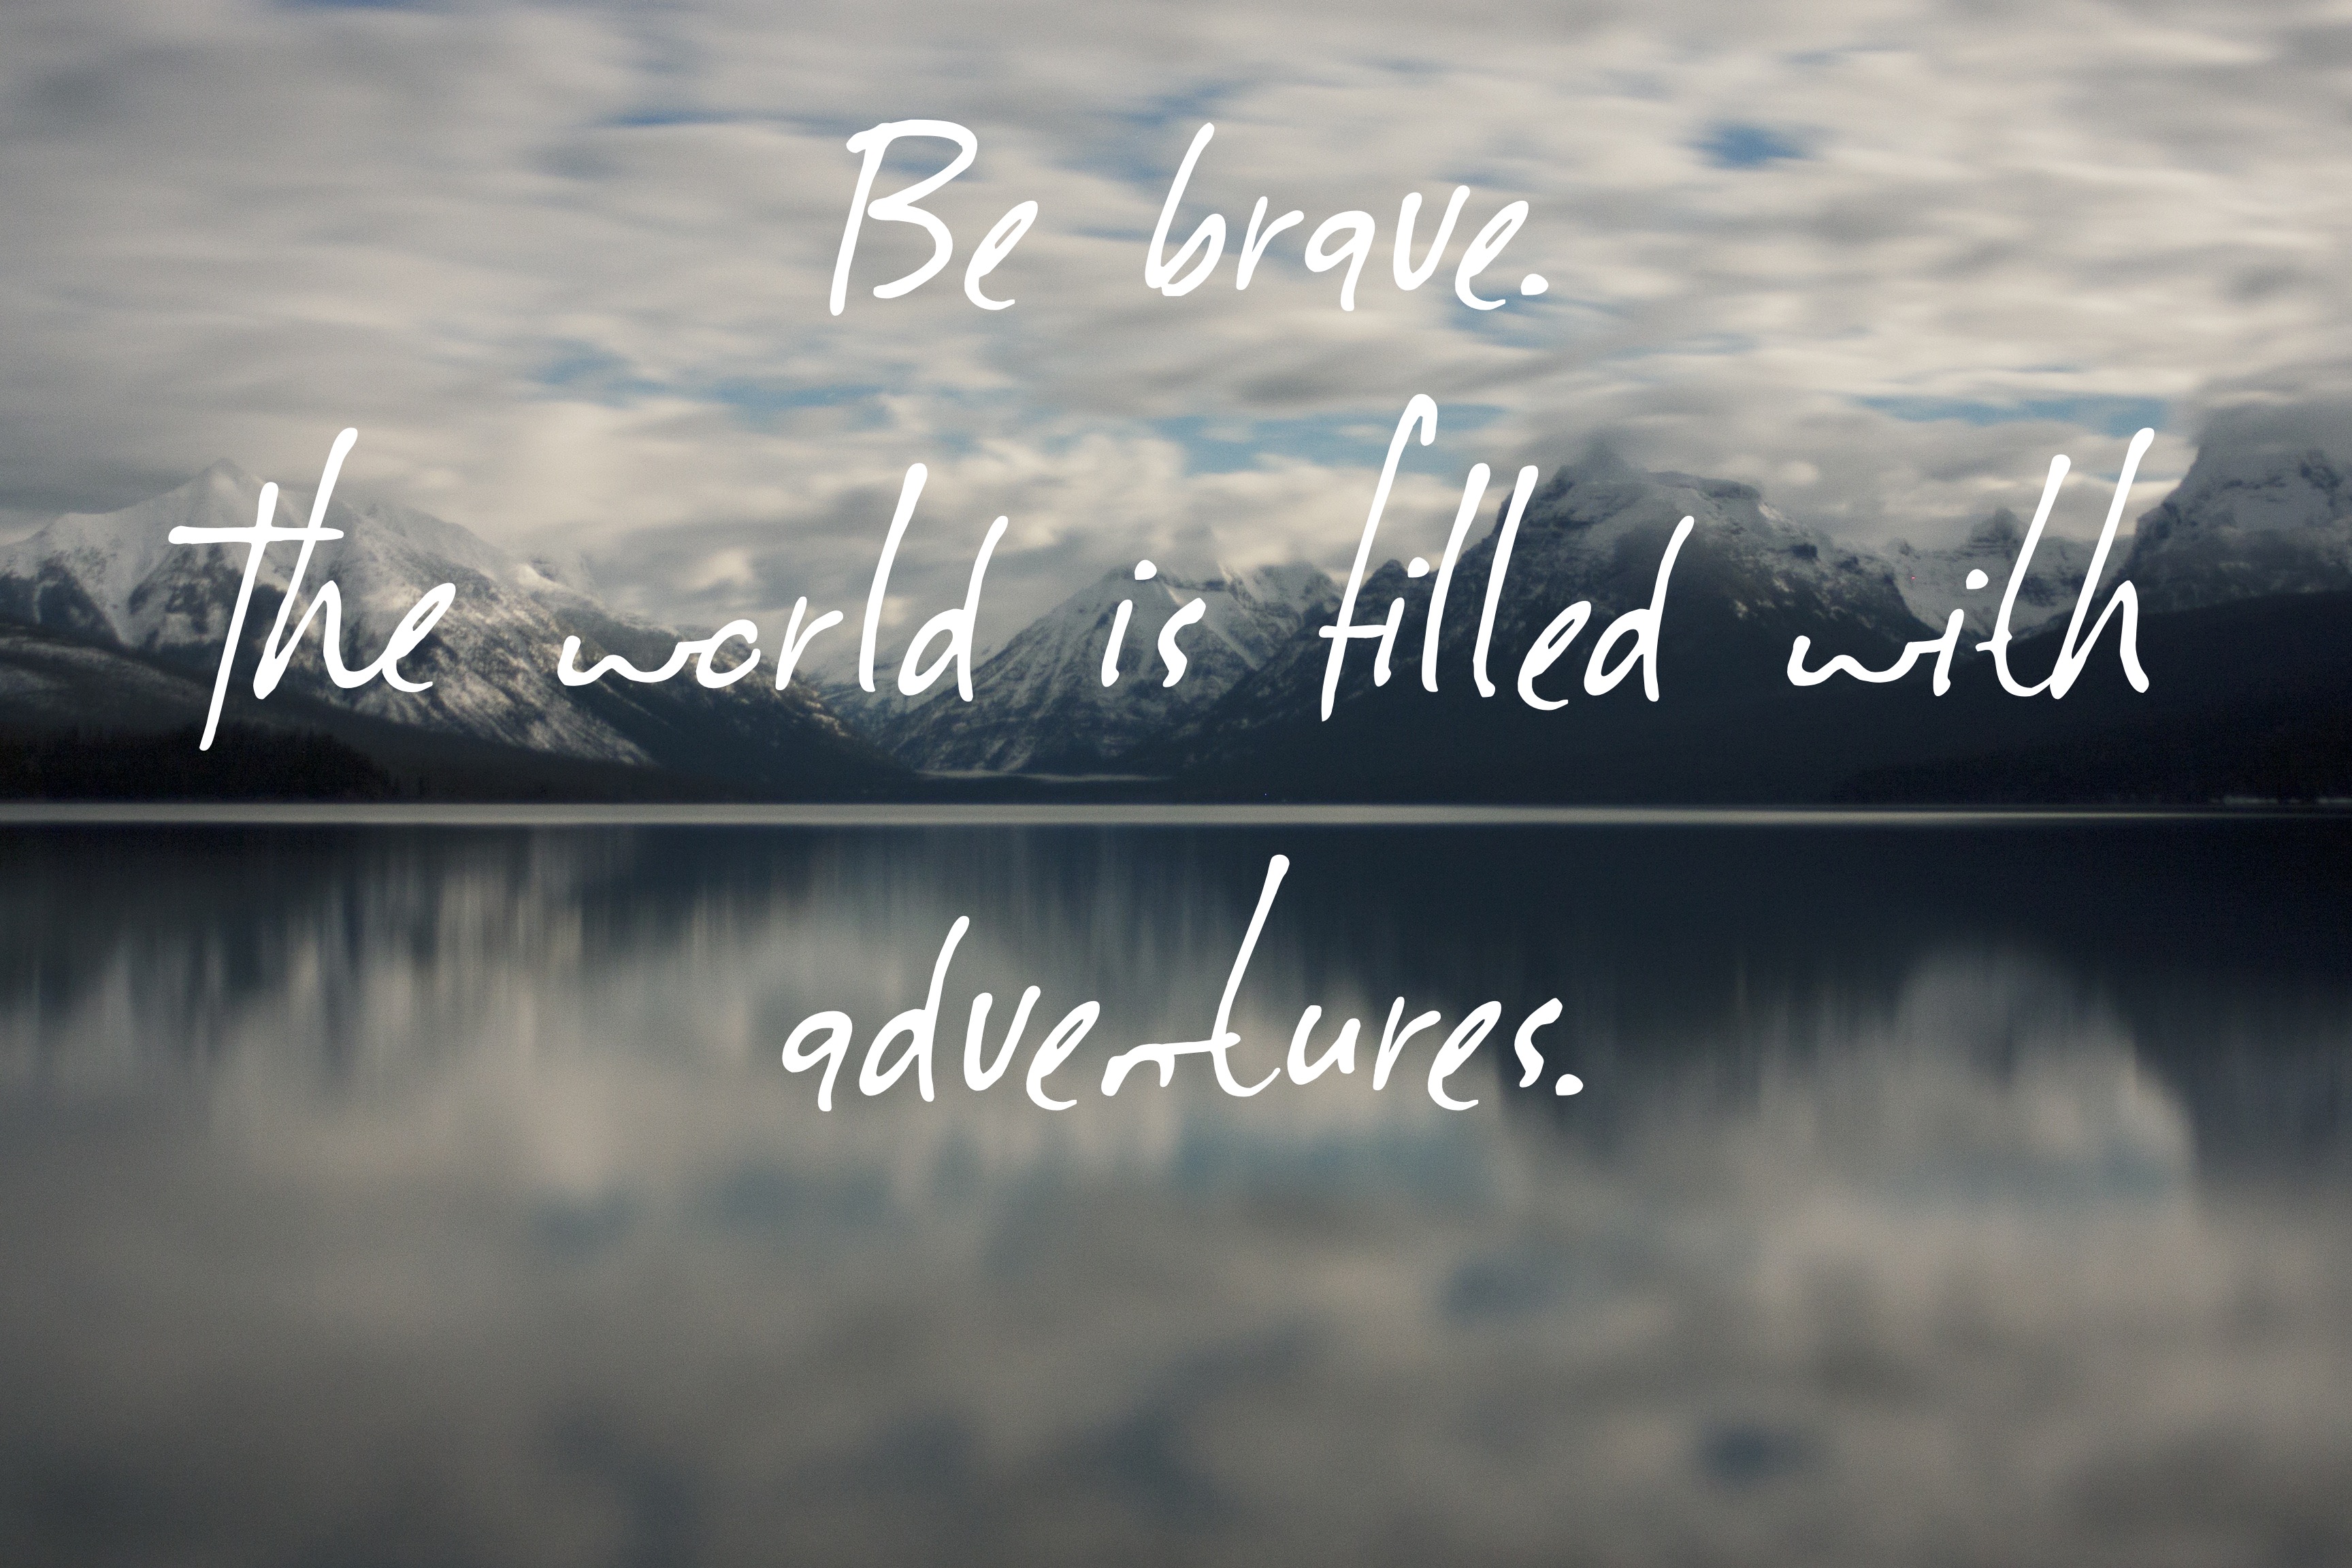 The world is filled with adventure.